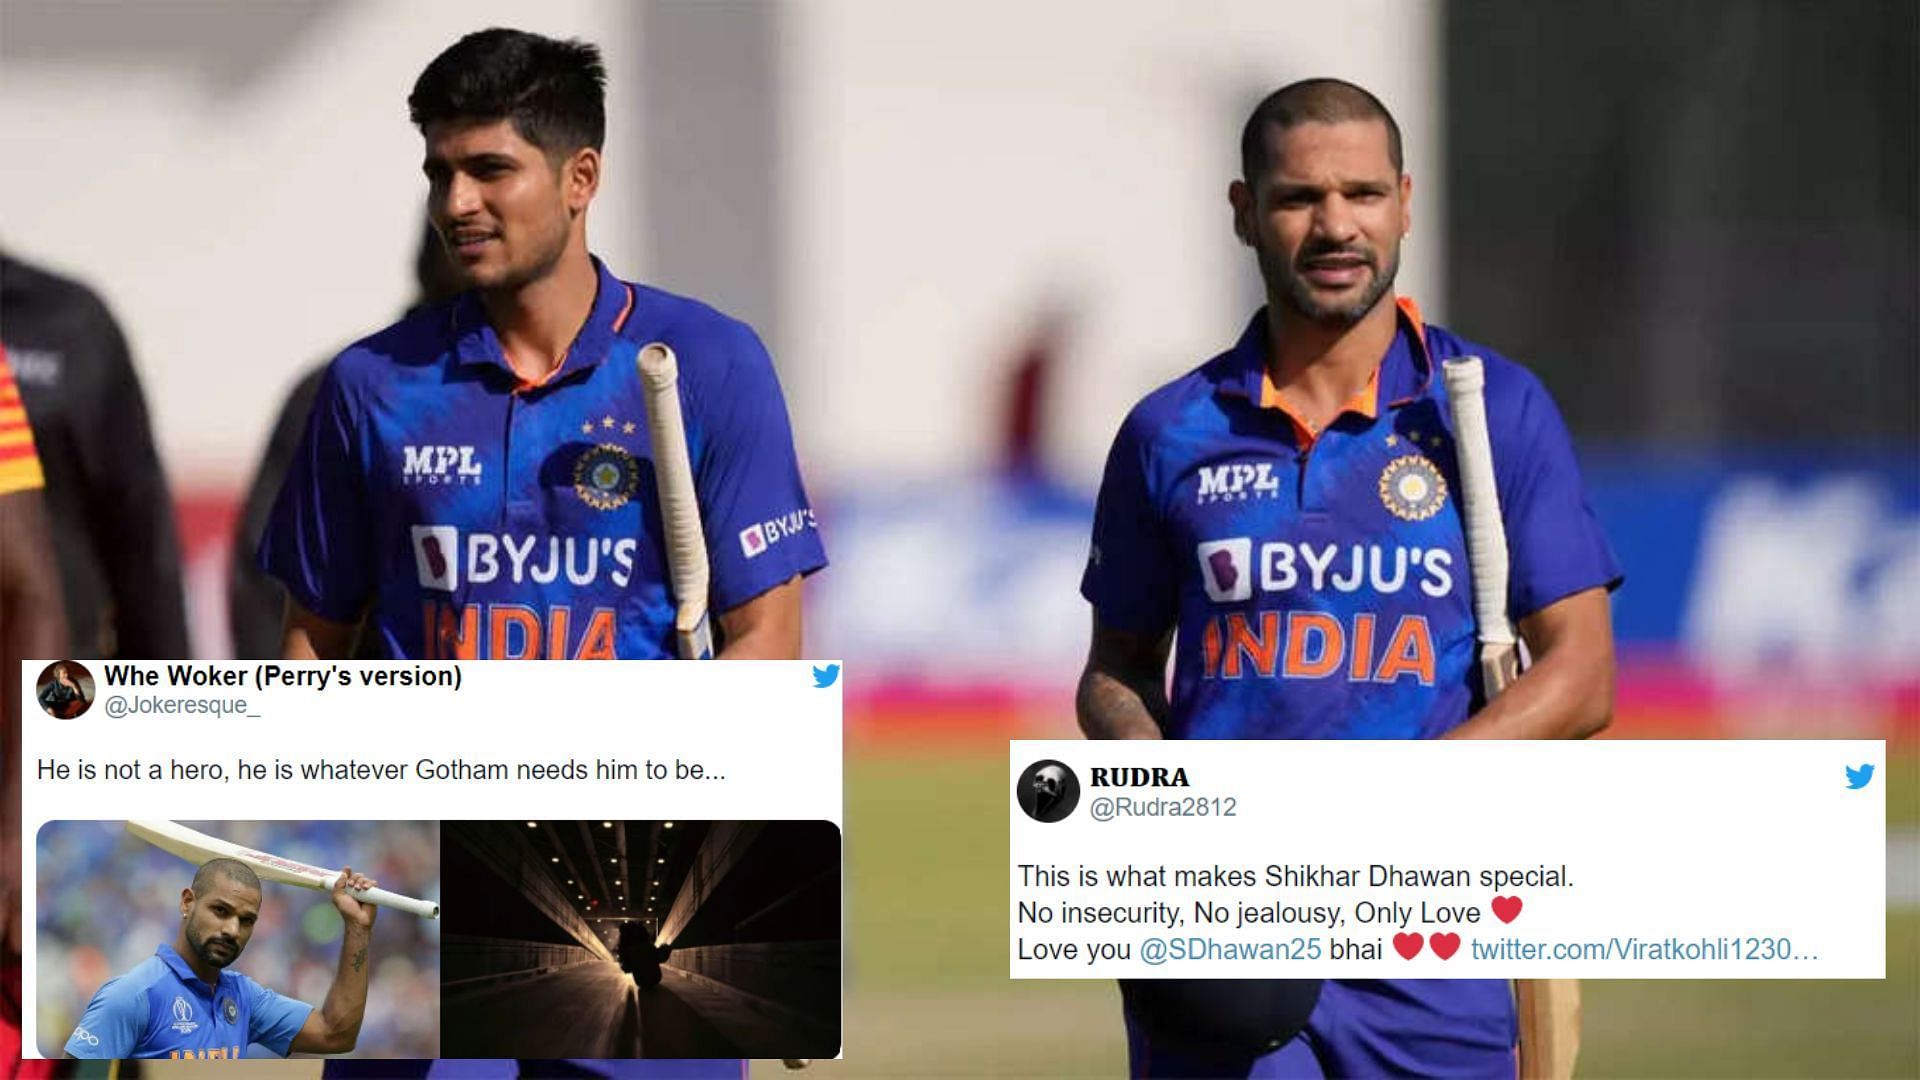 Fans were in awe of Dhawan for the way he answered selflessly (P.C.:Twitter)